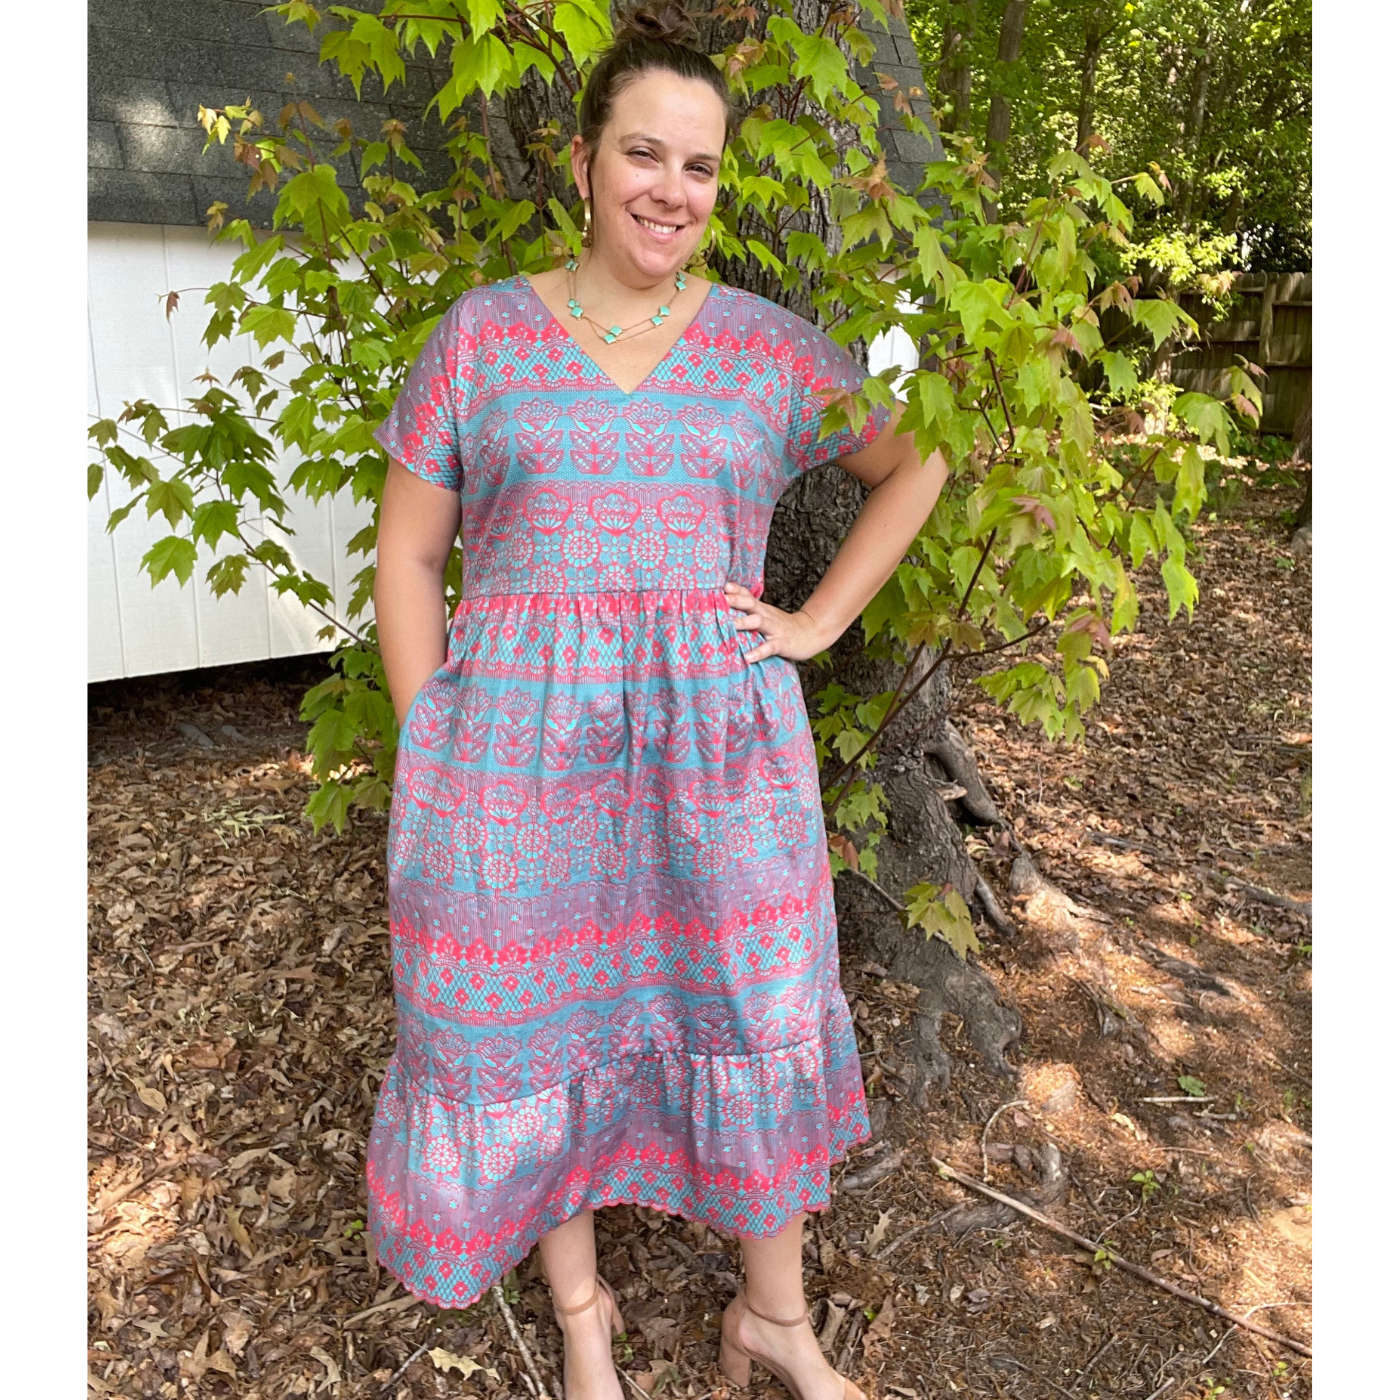 Sarah stands with her left hand on her hip and her right hand in her pocket in the mulch in a backyard around some trees. She is smiling at the camera and wearing a long turquoise dress with a hot pink lace design.